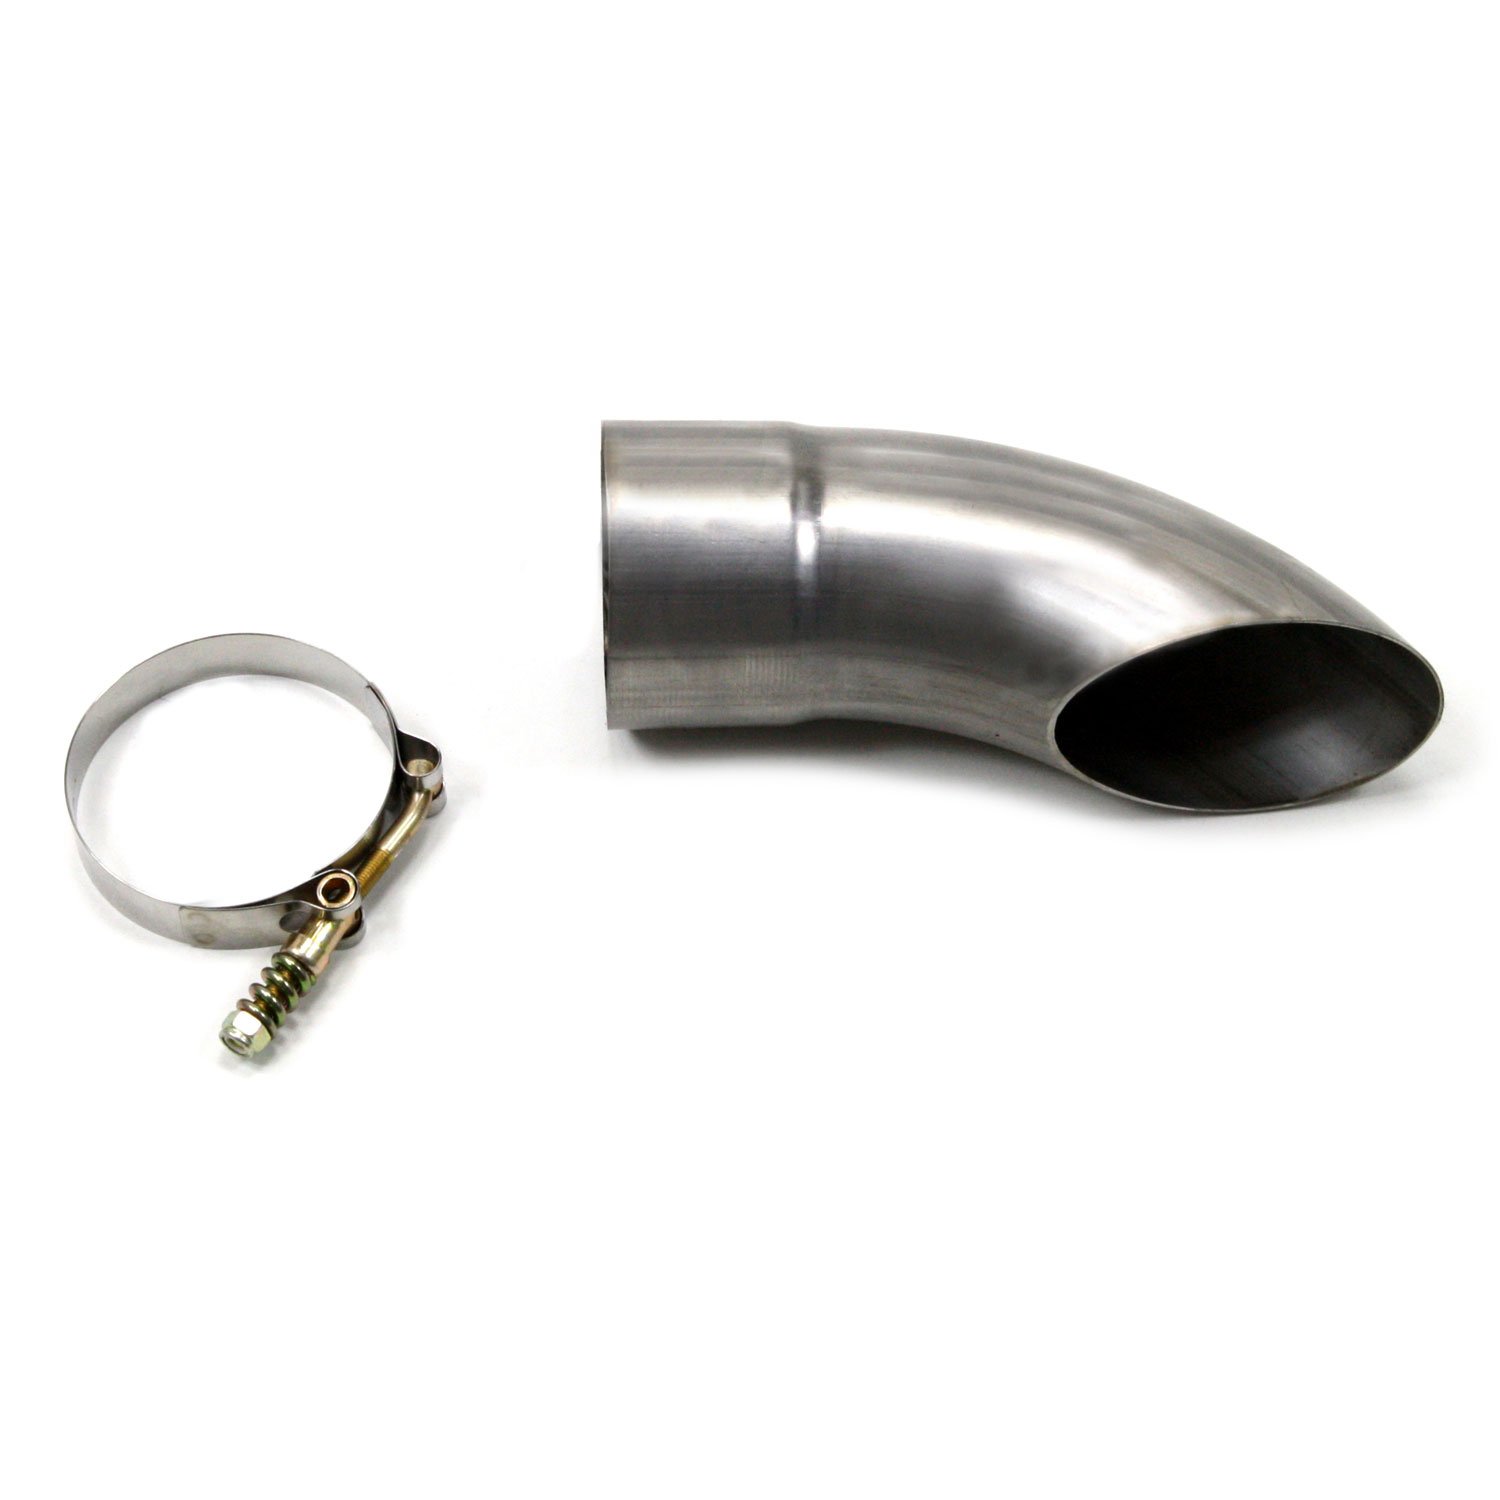 Electric Exhaust Cutout 2-1/2" Stainless Steel Turn Down